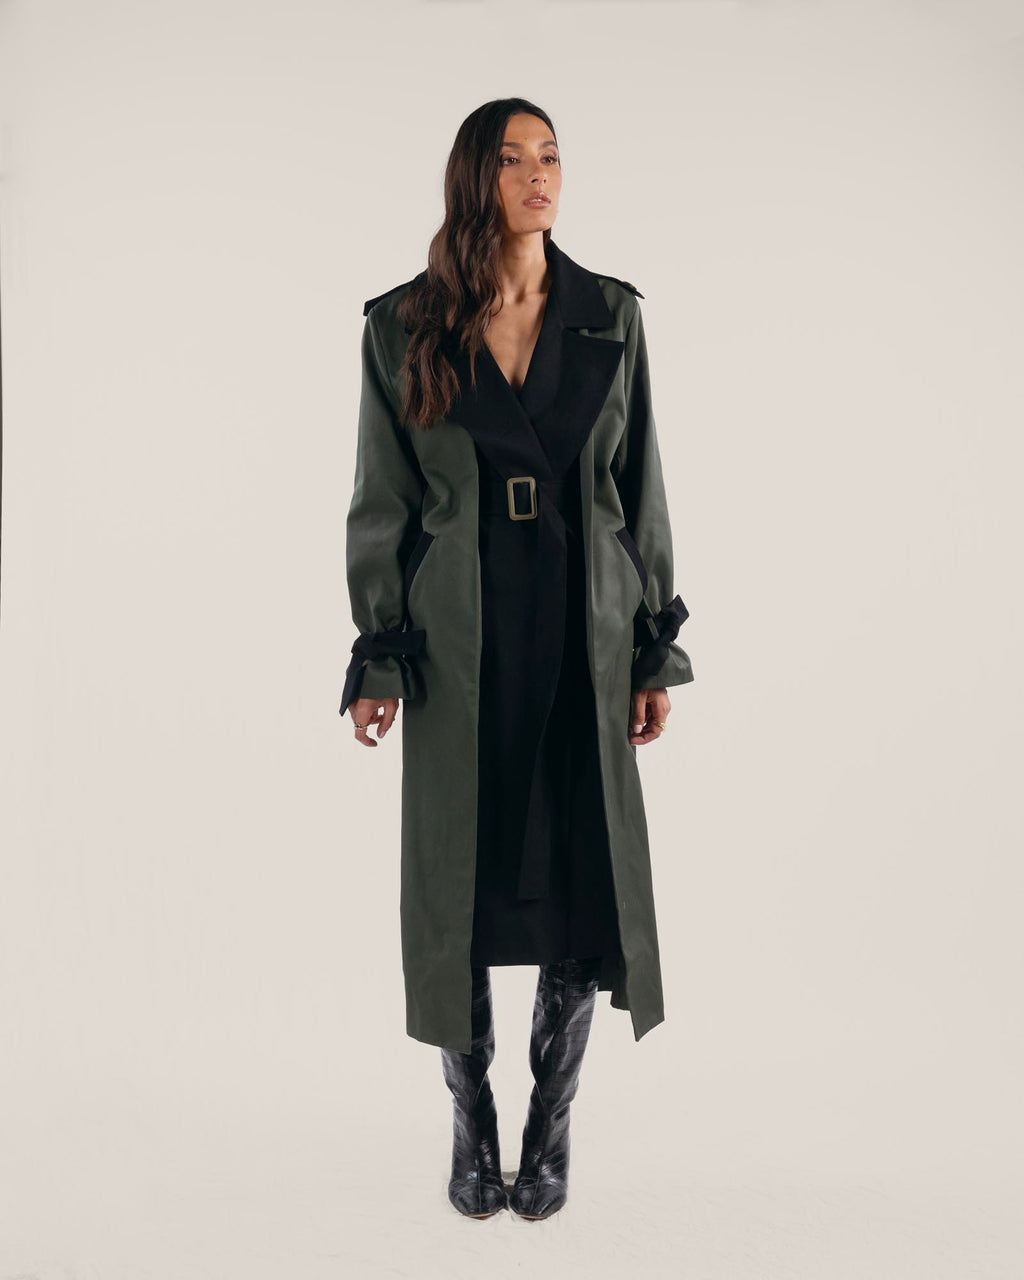 The Ember Trench Coat